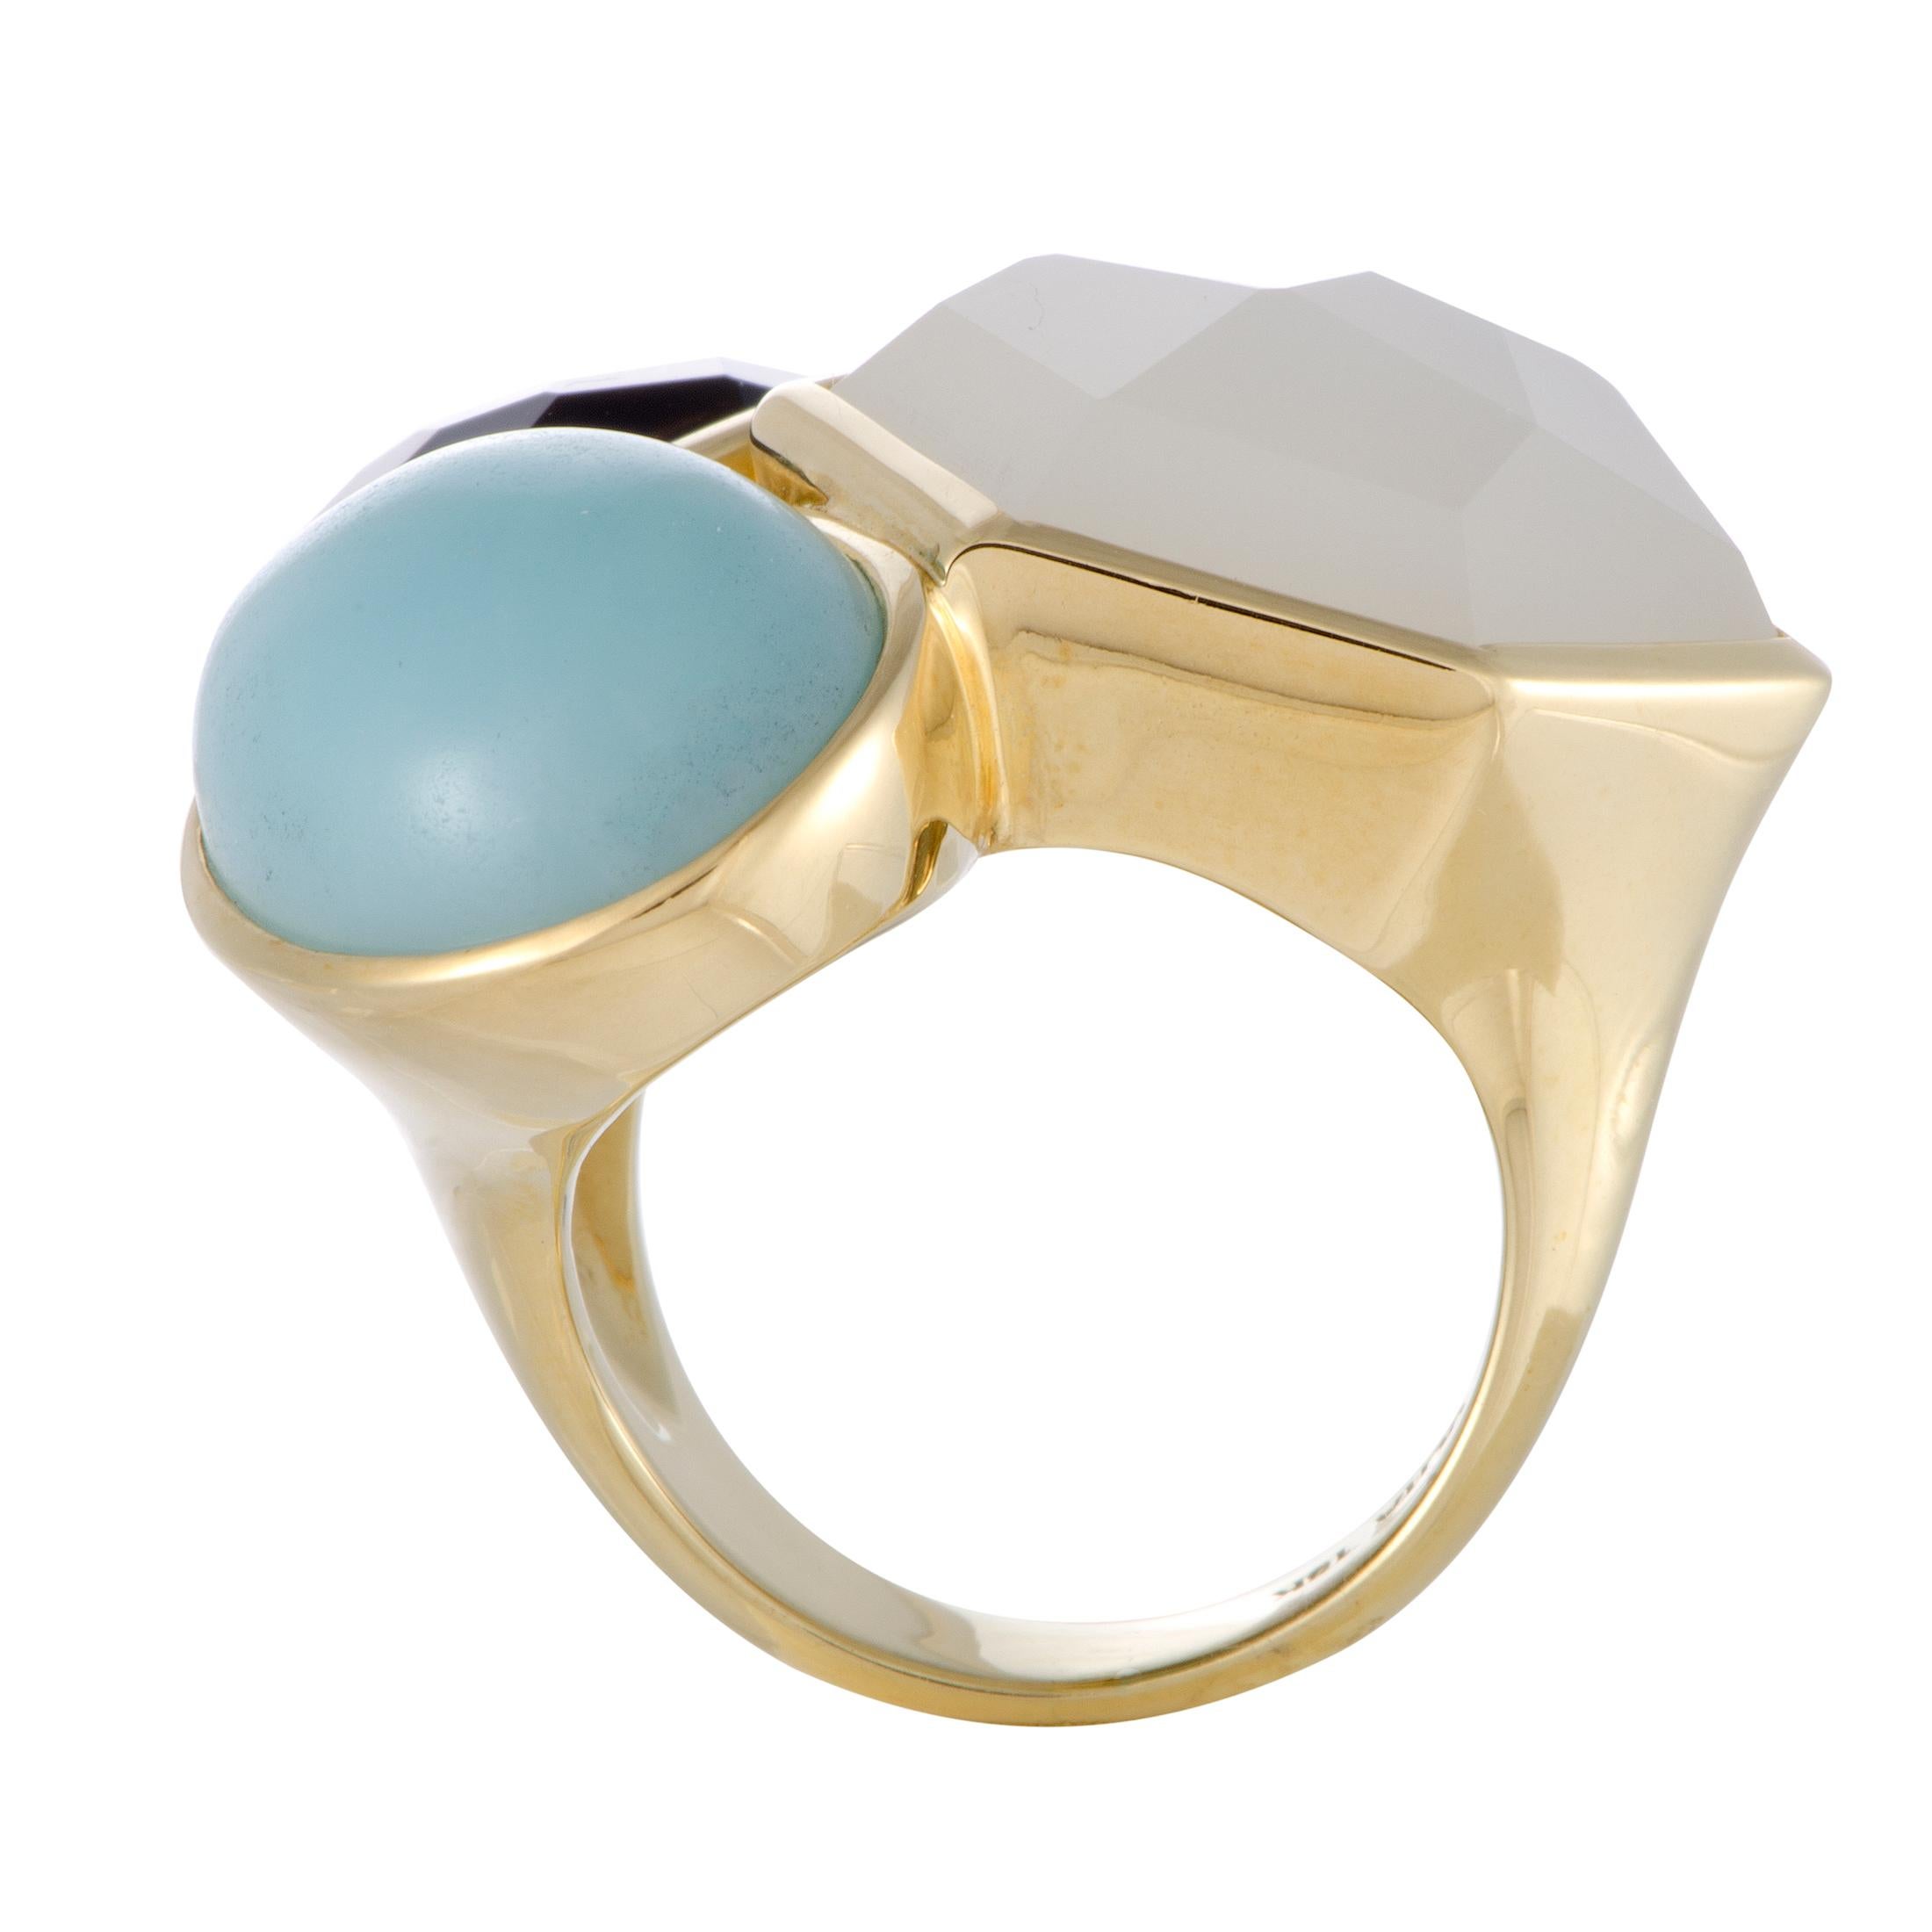 Made of attractive 18K yellow gold and delightfully decorated with three wonderful stones, this extraordinary ring from Ippolita’s  “Rock Candy” collection boasts fashionable eye-catching appearance.
Ring Top Dimensions: 35mm x 27mm